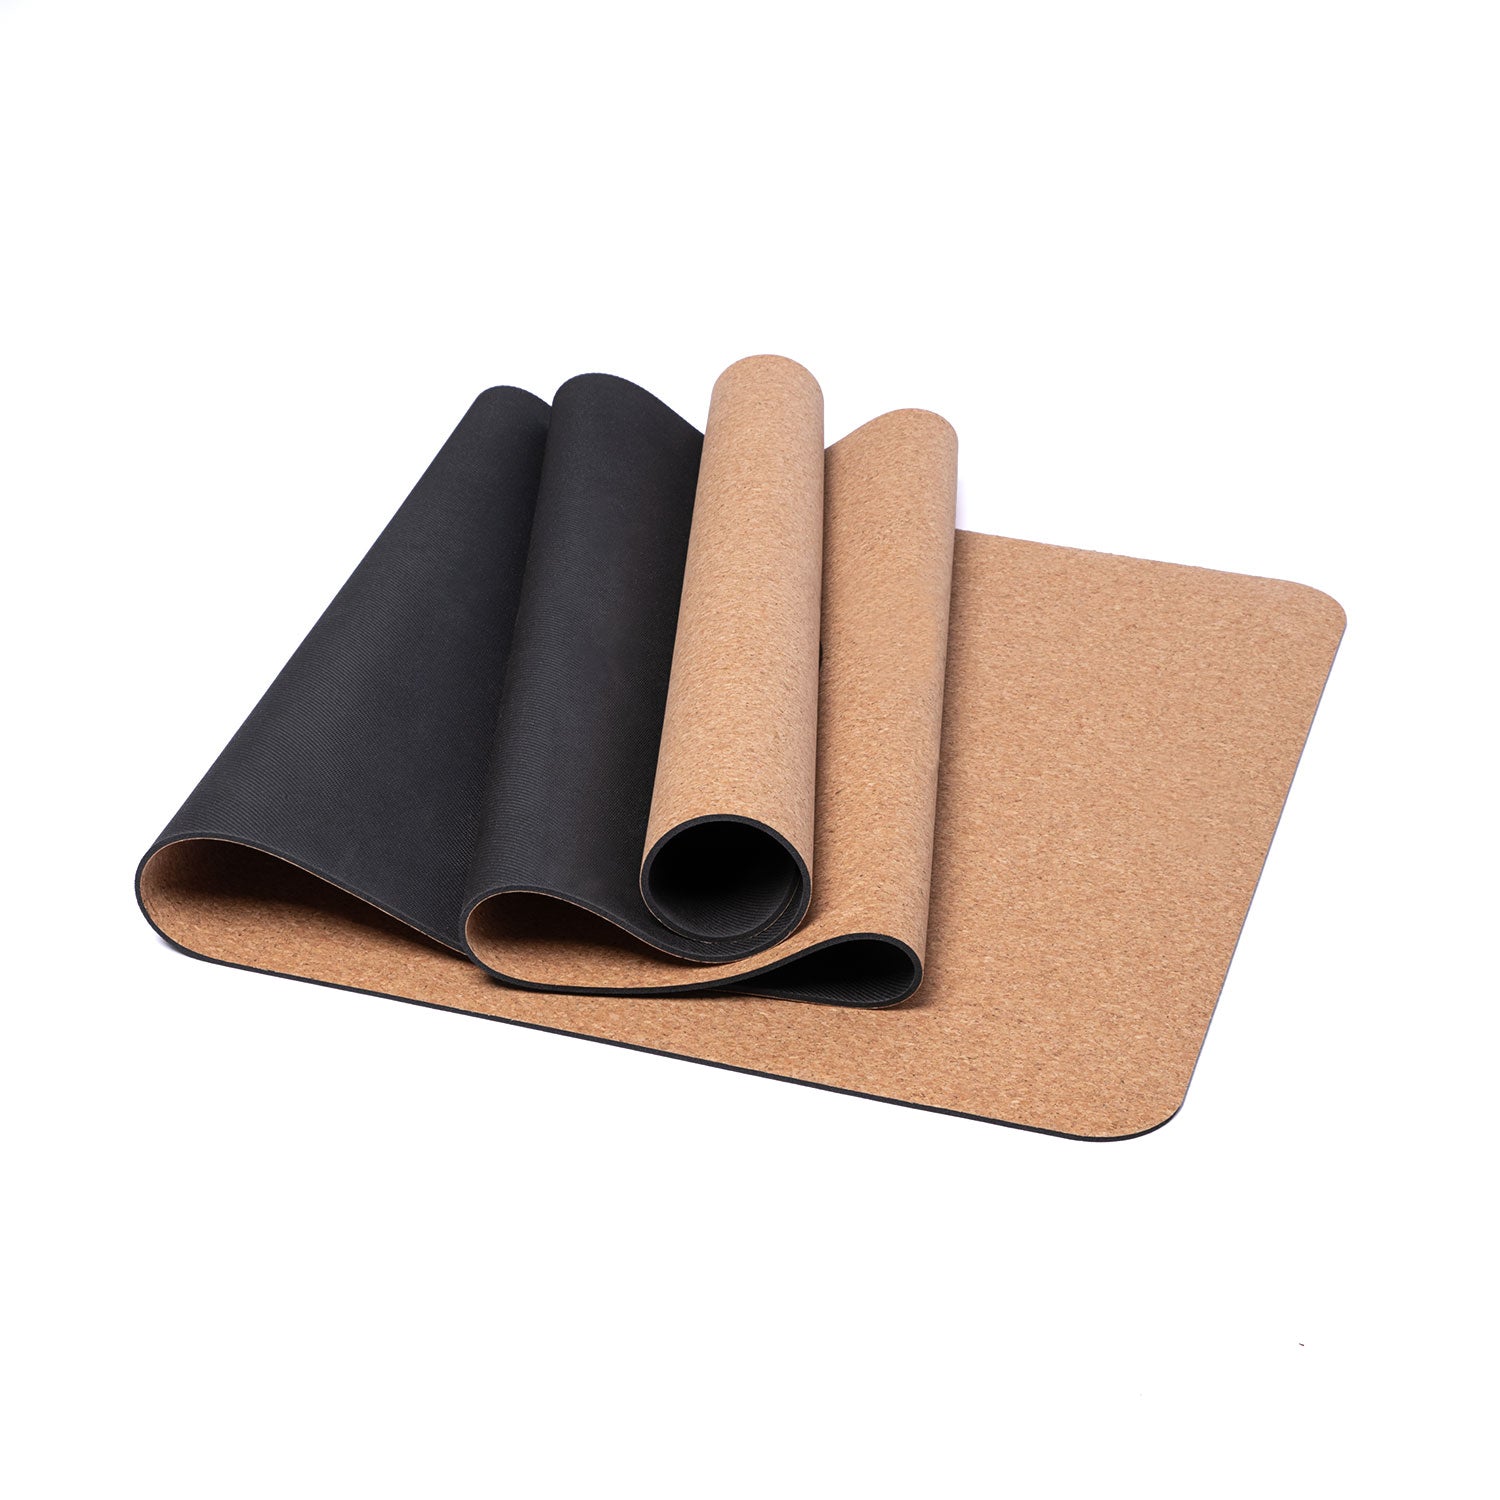 Cork Yoga Mat Latex Free or Natural Rubber Extra Long Non-slip Mat for Hot  Yoga W/ Carrying Strap Peacock, Dolphin, Lotus, Elephant 